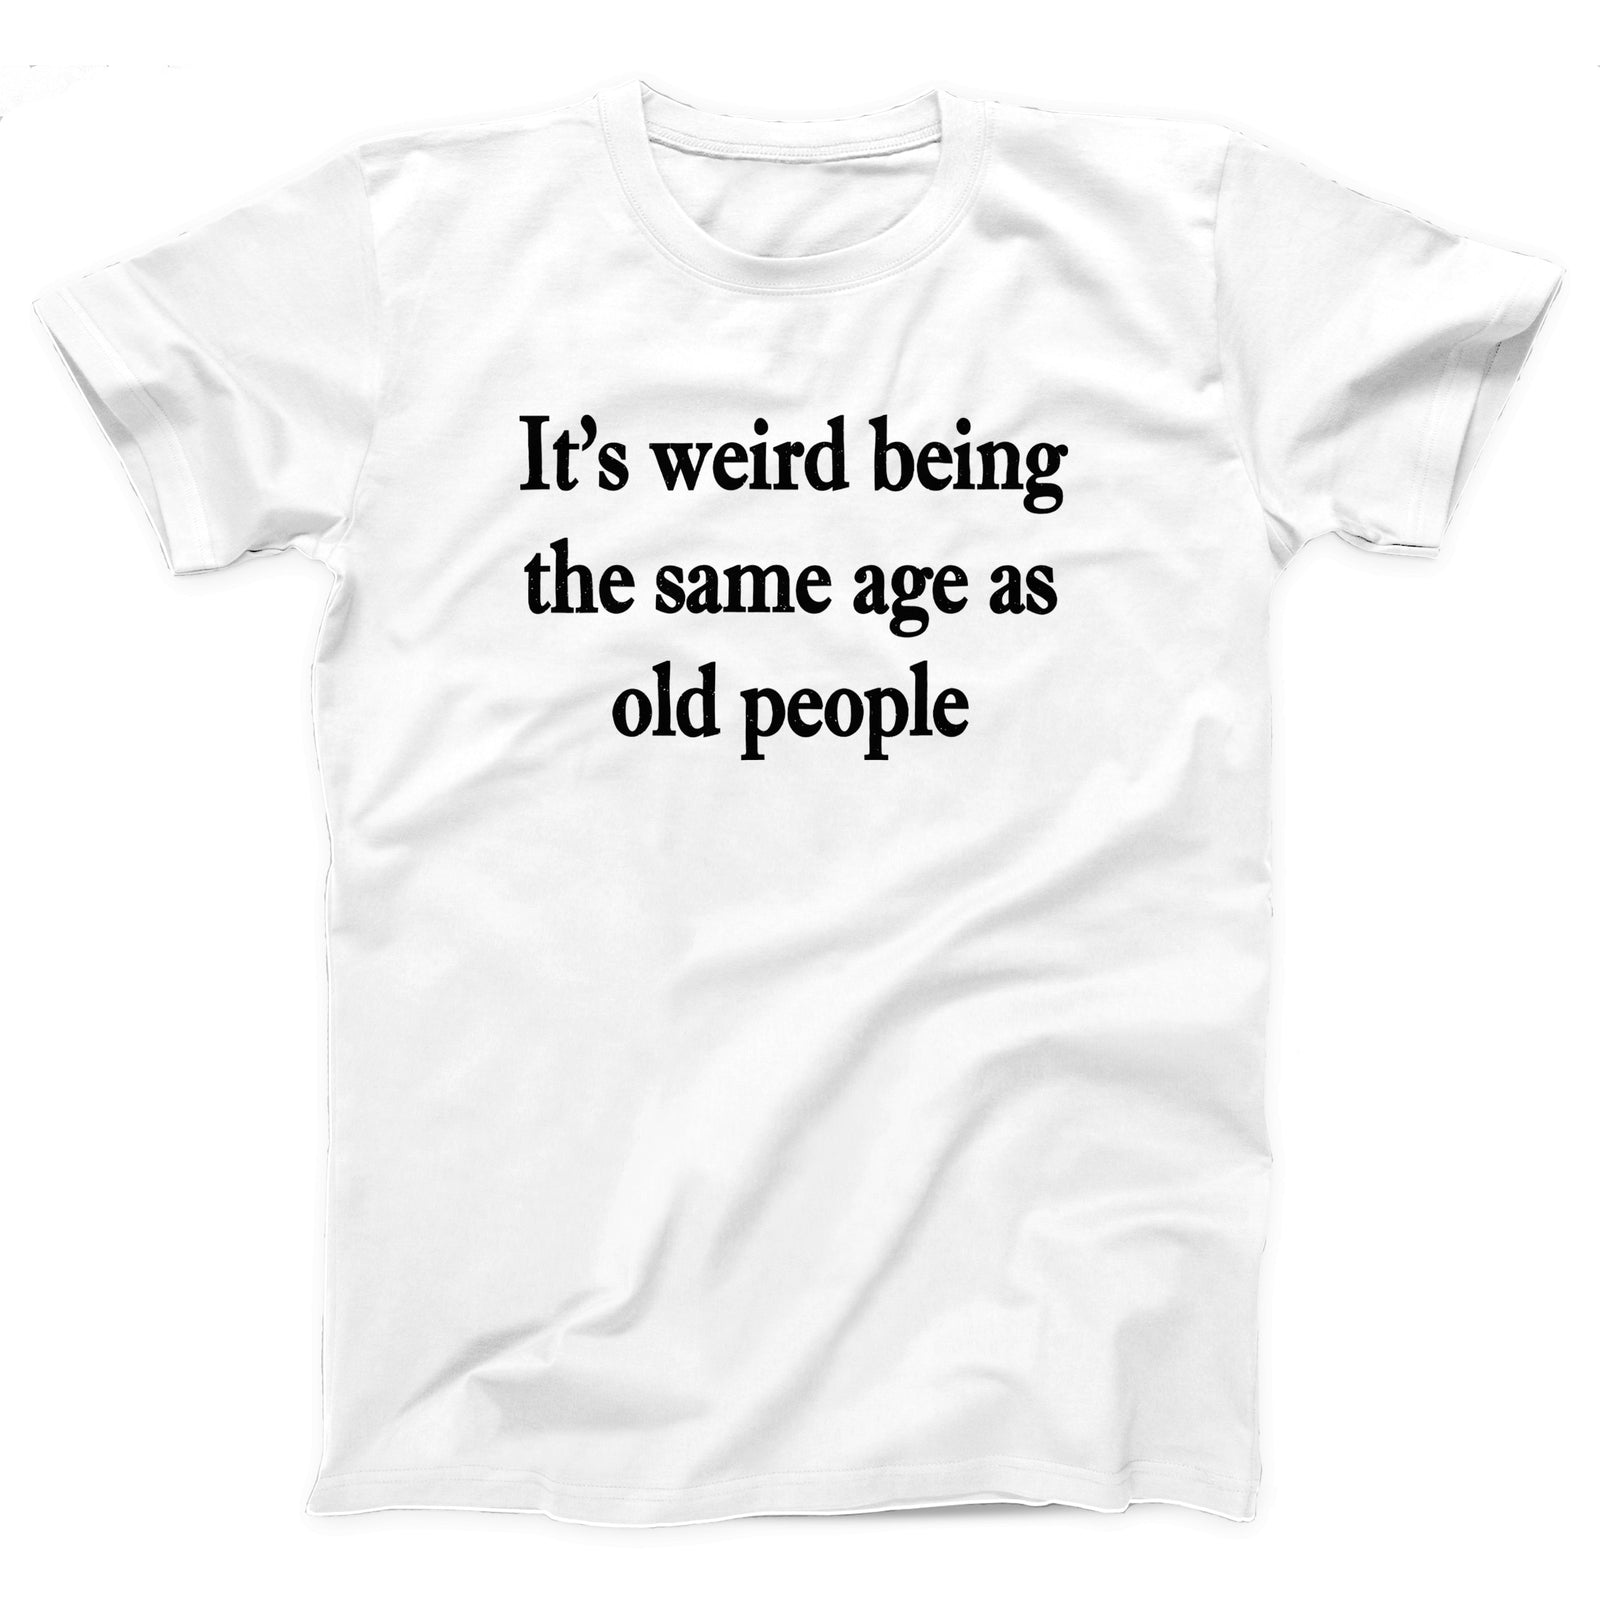 //cdn.shopify.com/s/files/1/0274/2488/2766/products/its-weird-being-the-same-age-as-old-people-menunisex-t-shirt-492402_5000x.jpg?v=1653499004 5000w,
    //cdn.shopify.com/s/files/1/0274/2488/2766/products/its-weird-being-the-same-age-as-old-people-menunisex-t-shirt-492402_4500x.jpg?v=1653499004 4500w,
    //cdn.shopify.com/s/files/1/0274/2488/2766/products/its-weird-being-the-same-age-as-old-people-menunisex-t-shirt-492402_4000x.jpg?v=1653499004 4000w,
    //cdn.shopify.com/s/files/1/0274/2488/2766/products/its-weird-being-the-same-age-as-old-people-menunisex-t-shirt-492402_3500x.jpg?v=1653499004 3500w,
    //cdn.shopify.com/s/files/1/0274/2488/2766/products/its-weird-being-the-same-age-as-old-people-menunisex-t-shirt-492402_3000x.jpg?v=1653499004 3000w,
    //cdn.shopify.com/s/files/1/0274/2488/2766/products/its-weird-being-the-same-age-as-old-people-menunisex-t-shirt-492402_2500x.jpg?v=1653499004 2500w,
    //cdn.shopify.com/s/files/1/0274/2488/2766/products/its-weird-being-the-same-age-as-old-people-menunisex-t-shirt-492402_2000x.jpg?v=1653499004 2000w,
    //cdn.shopify.com/s/files/1/0274/2488/2766/products/its-weird-being-the-same-age-as-old-people-menunisex-t-shirt-492402_1800x.jpg?v=1653499004 1800w,
    //cdn.shopify.com/s/files/1/0274/2488/2766/products/its-weird-being-the-same-age-as-old-people-menunisex-t-shirt-492402_1600x.jpg?v=1653499004 1600w,
    //cdn.shopify.com/s/files/1/0274/2488/2766/products/its-weird-being-the-same-age-as-old-people-menunisex-t-shirt-492402_1400x.jpg?v=1653499004 1400w,
    //cdn.shopify.com/s/files/1/0274/2488/2766/products/its-weird-being-the-same-age-as-old-people-menunisex-t-shirt-492402_1200x.jpg?v=1653499004 1200w,
    //cdn.shopify.com/s/files/1/0274/2488/2766/products/its-weird-being-the-same-age-as-old-people-menunisex-t-shirt-492402_1000x.jpg?v=1653499004 1000w,
    //cdn.shopify.com/s/files/1/0274/2488/2766/products/its-weird-being-the-same-age-as-old-people-menunisex-t-shirt-492402_800x.jpg?v=1653499004 800w,
    //cdn.shopify.com/s/files/1/0274/2488/2766/products/its-weird-being-the-same-age-as-old-people-menunisex-t-shirt-492402_600x.jpg?v=1653499004 600w,
    //cdn.shopify.com/s/files/1/0274/2488/2766/products/its-weird-being-the-same-age-as-old-people-menunisex-t-shirt-492402_400x.jpg?v=1653499004 400w,
    //cdn.shopify.com/s/files/1/0274/2488/2766/products/its-weird-being-the-same-age-as-old-people-menunisex-t-shirt-492402_200x.jpg?v=1653499004 200w